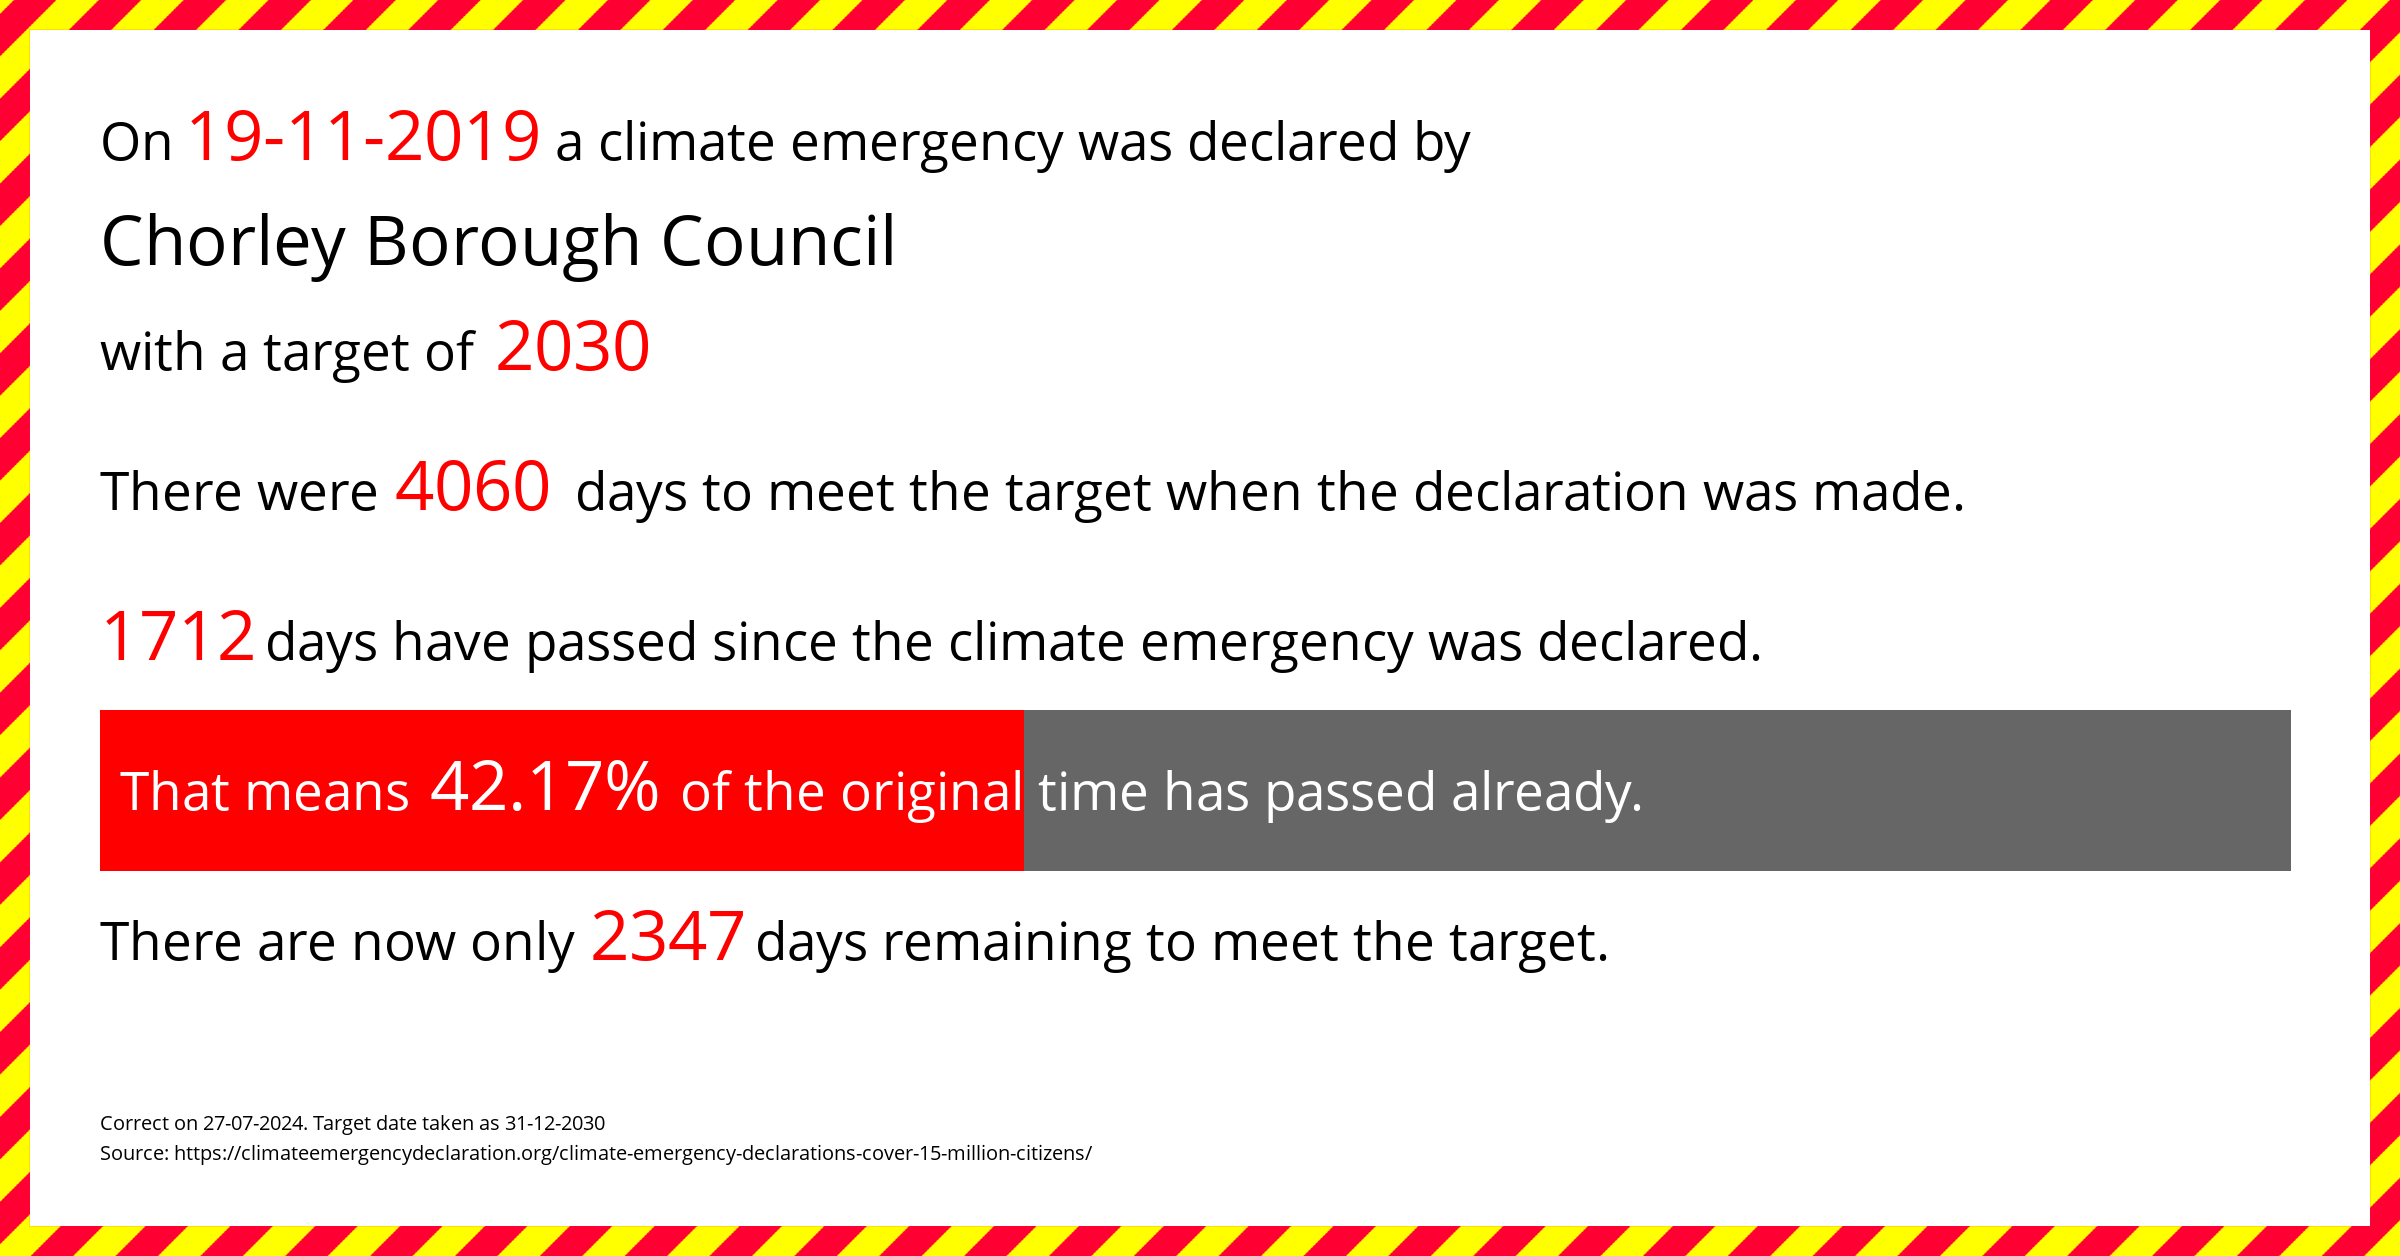 Chorley Borough Council declared a Climate emergency on Tuesday 19th November 2019, with a target of 2030.